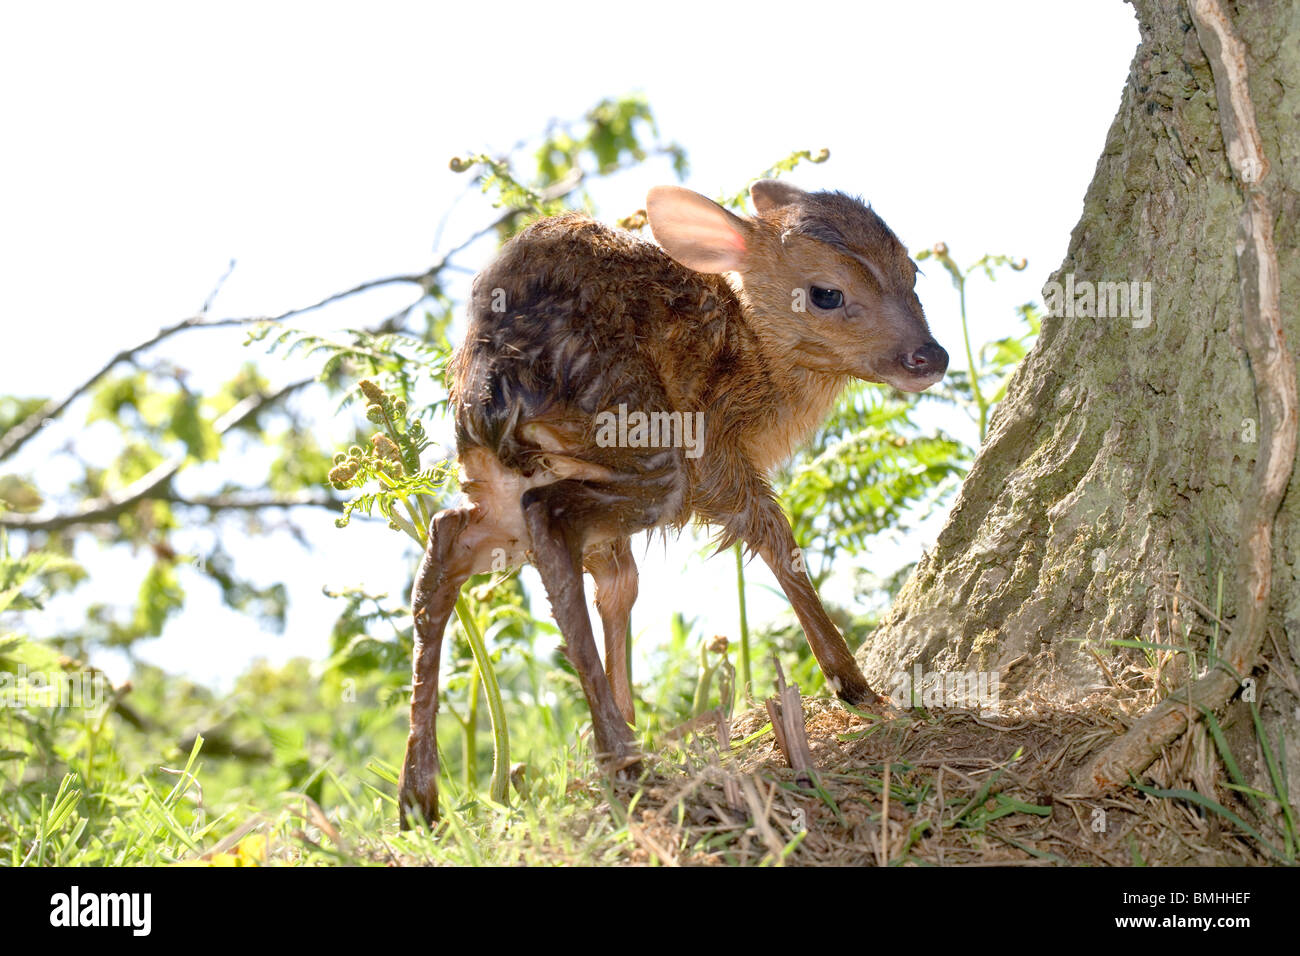 Muntjac Deer (Muntiacus reevesi). Newly born fawn, finding its feet and standing for first time. Spring. Norfolk. East Anglia. England. UK. Stock Photo